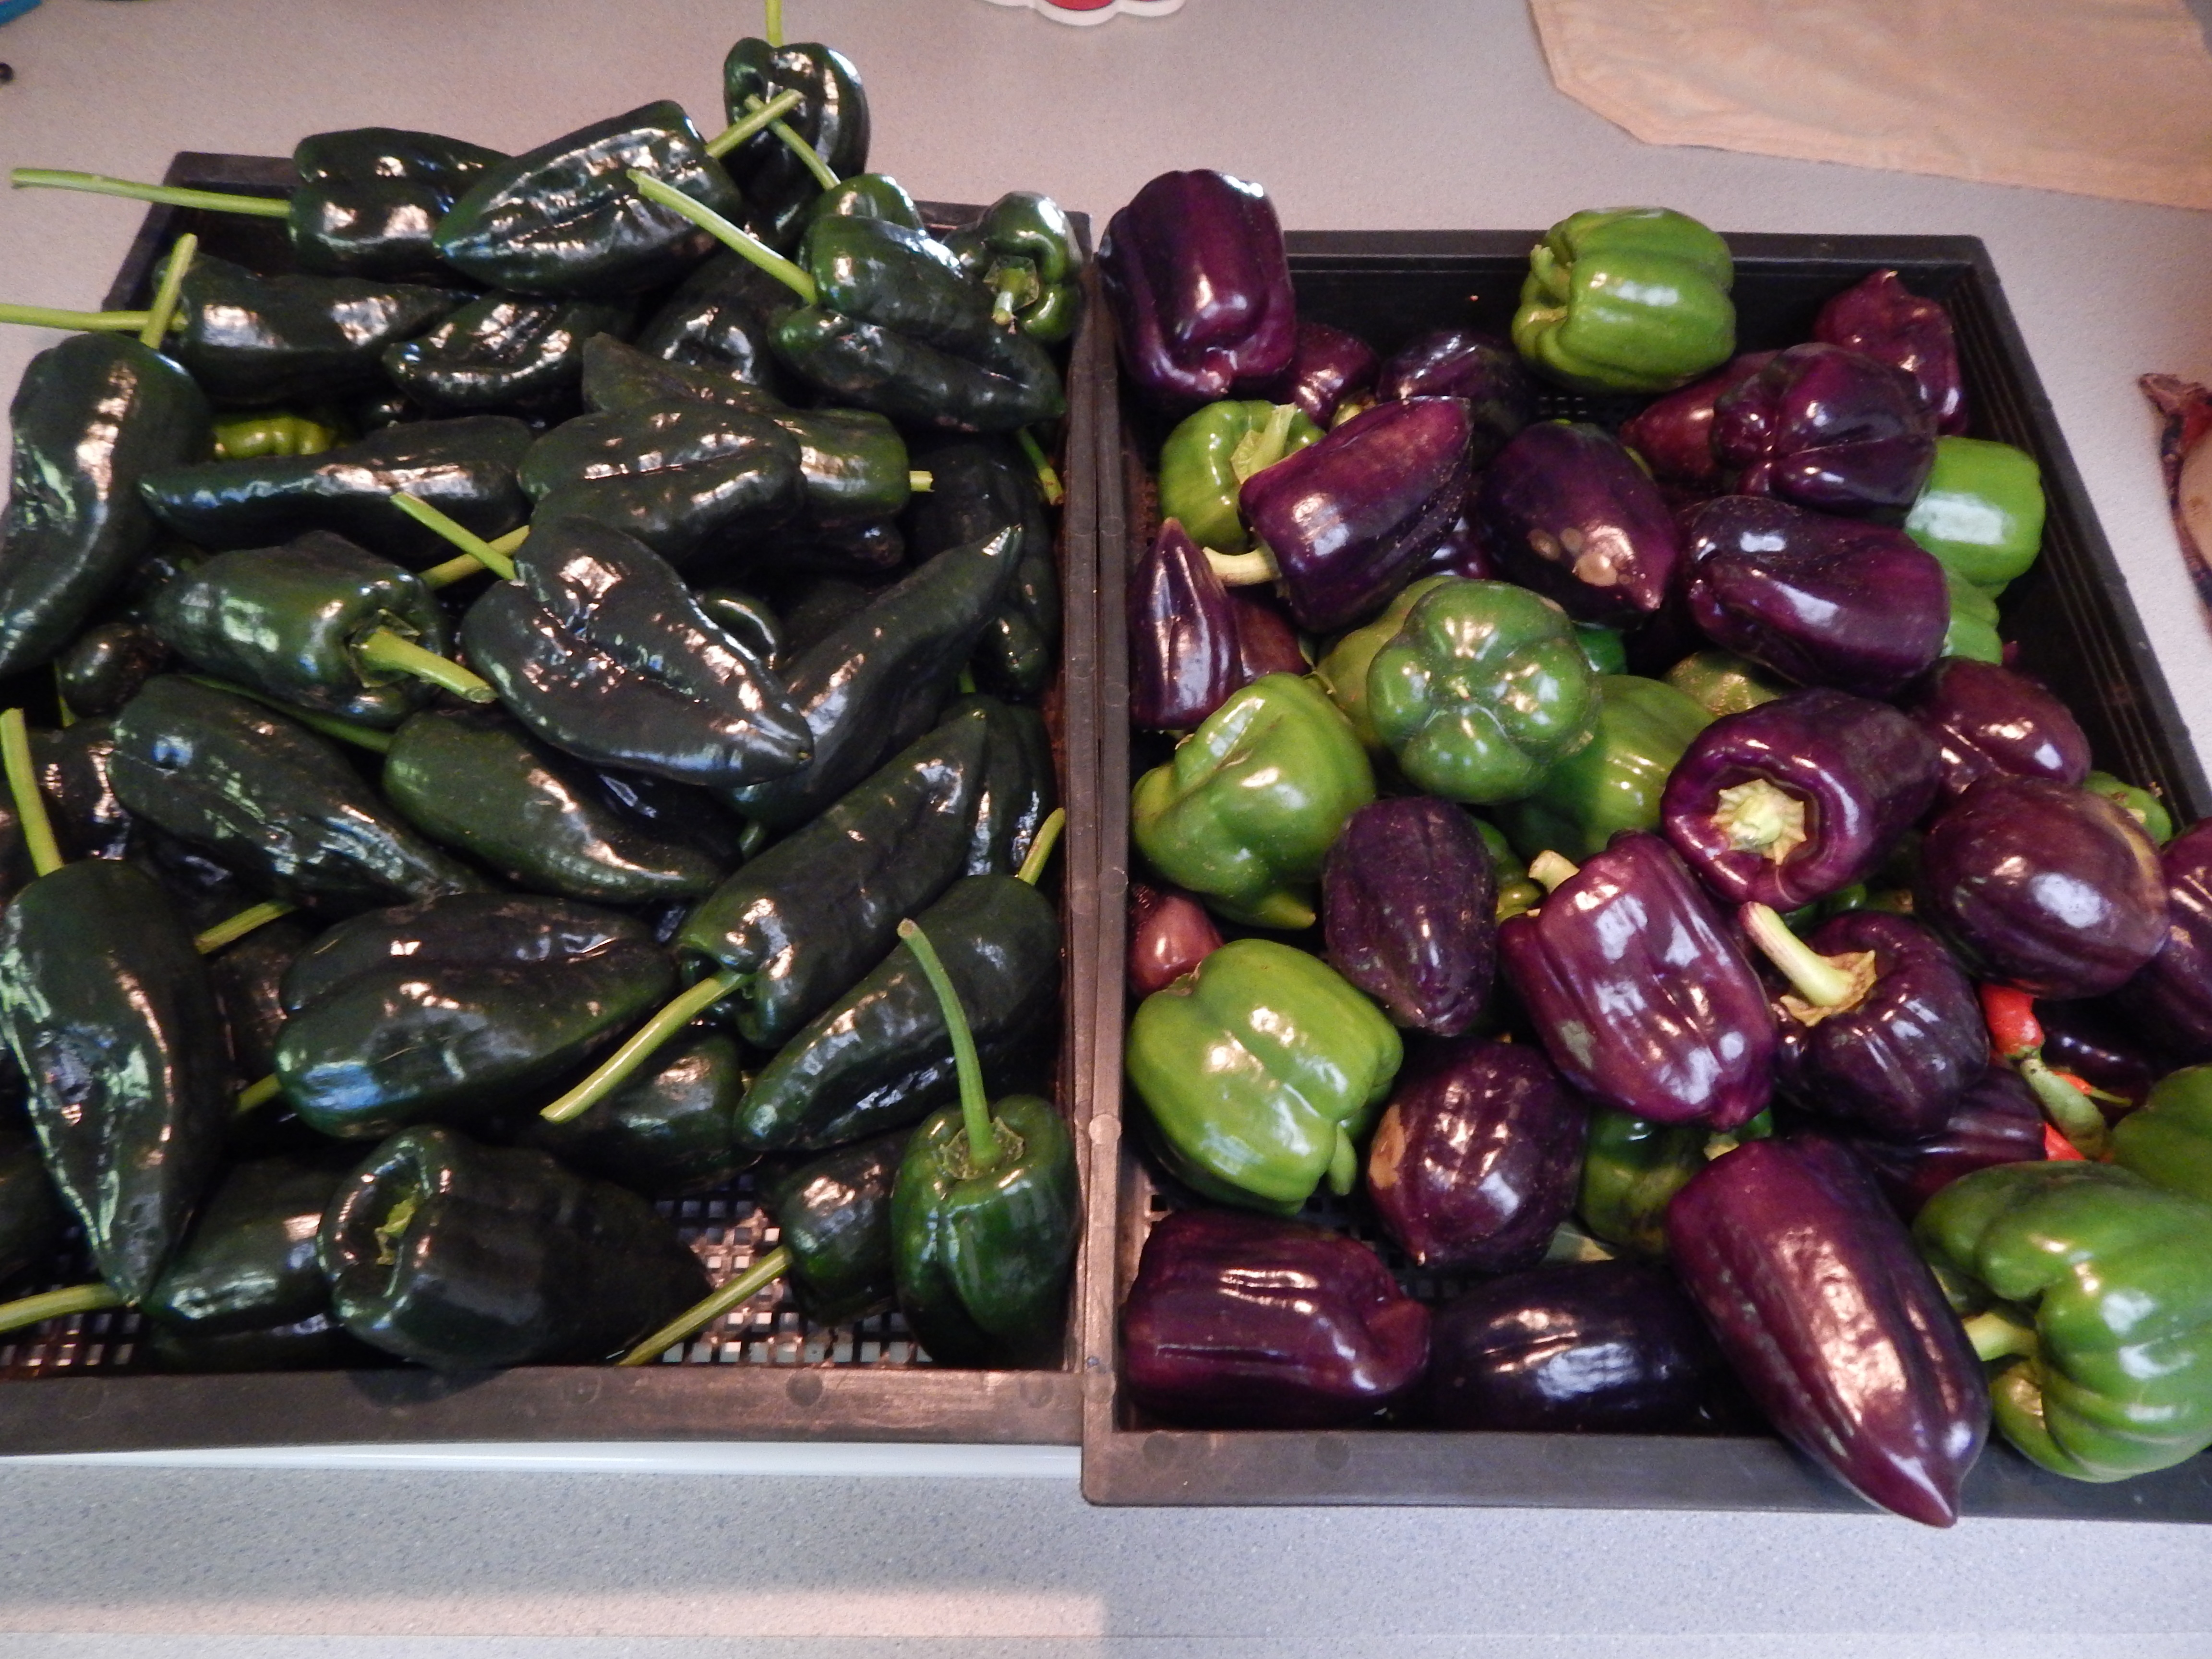 Pablano & Lilac peppers